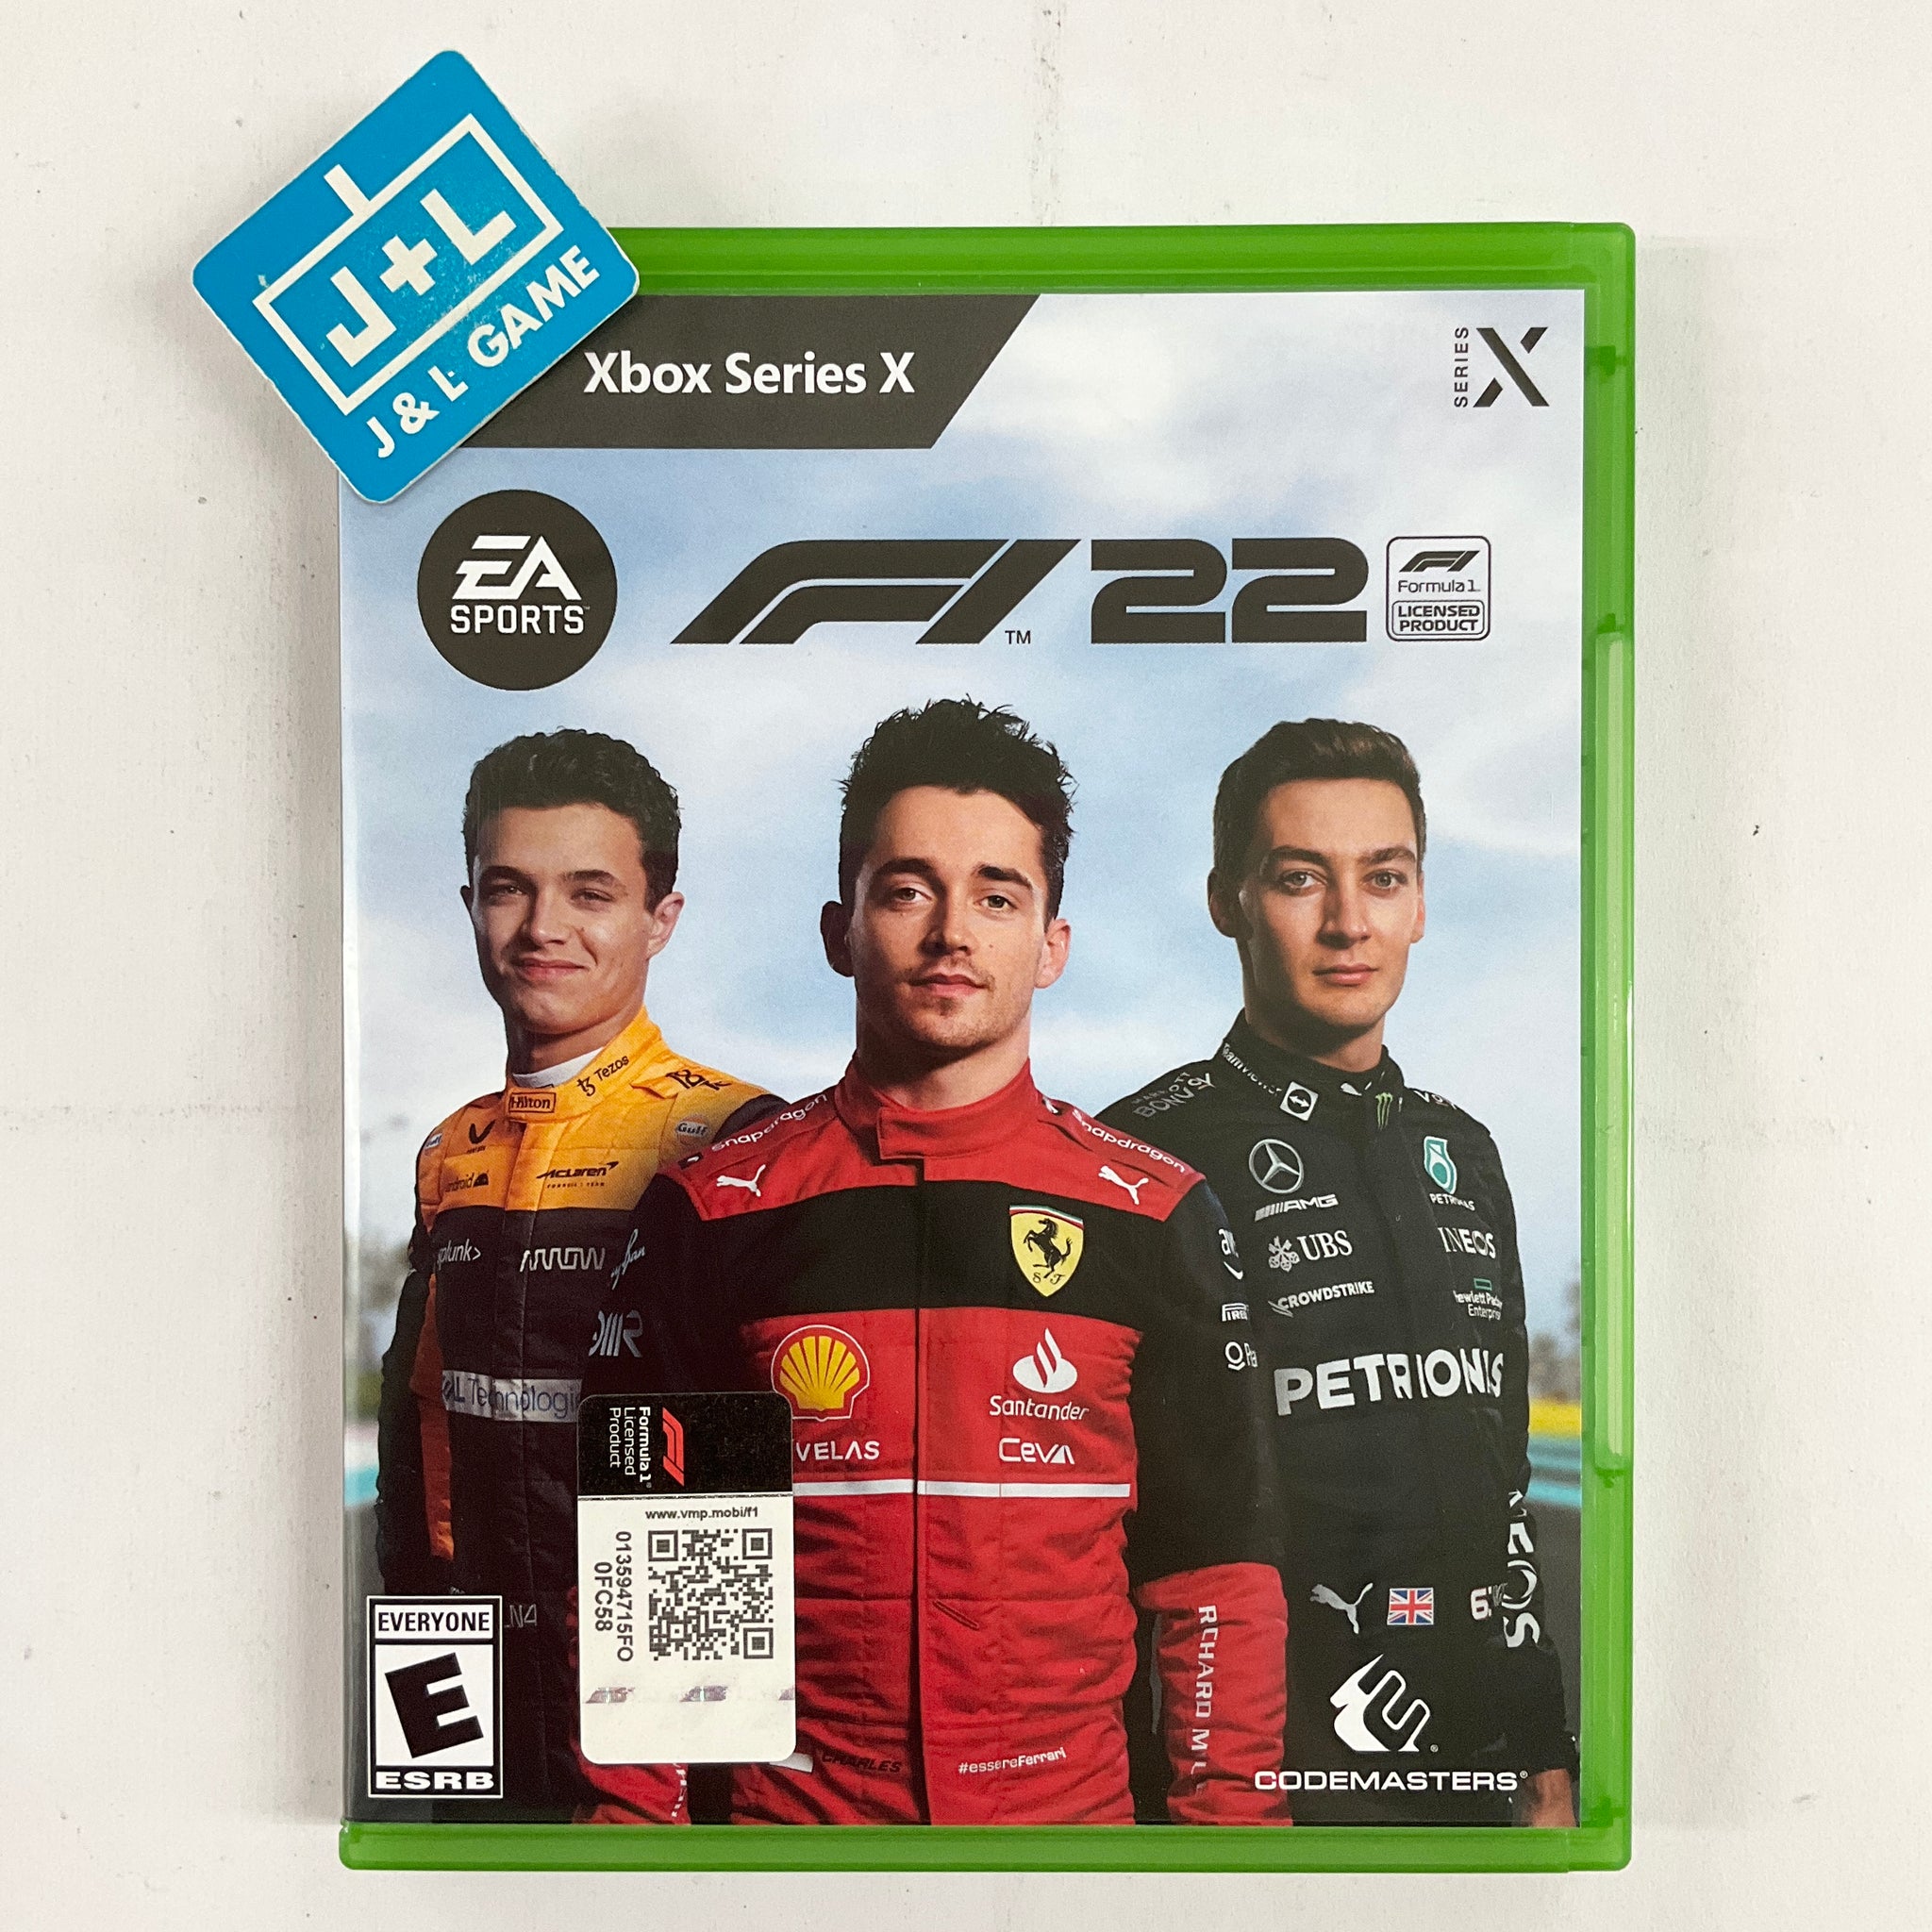 F1 2022 – (XSX) Xbox Series X [UNBOXING] Video Games Electronic Arts   